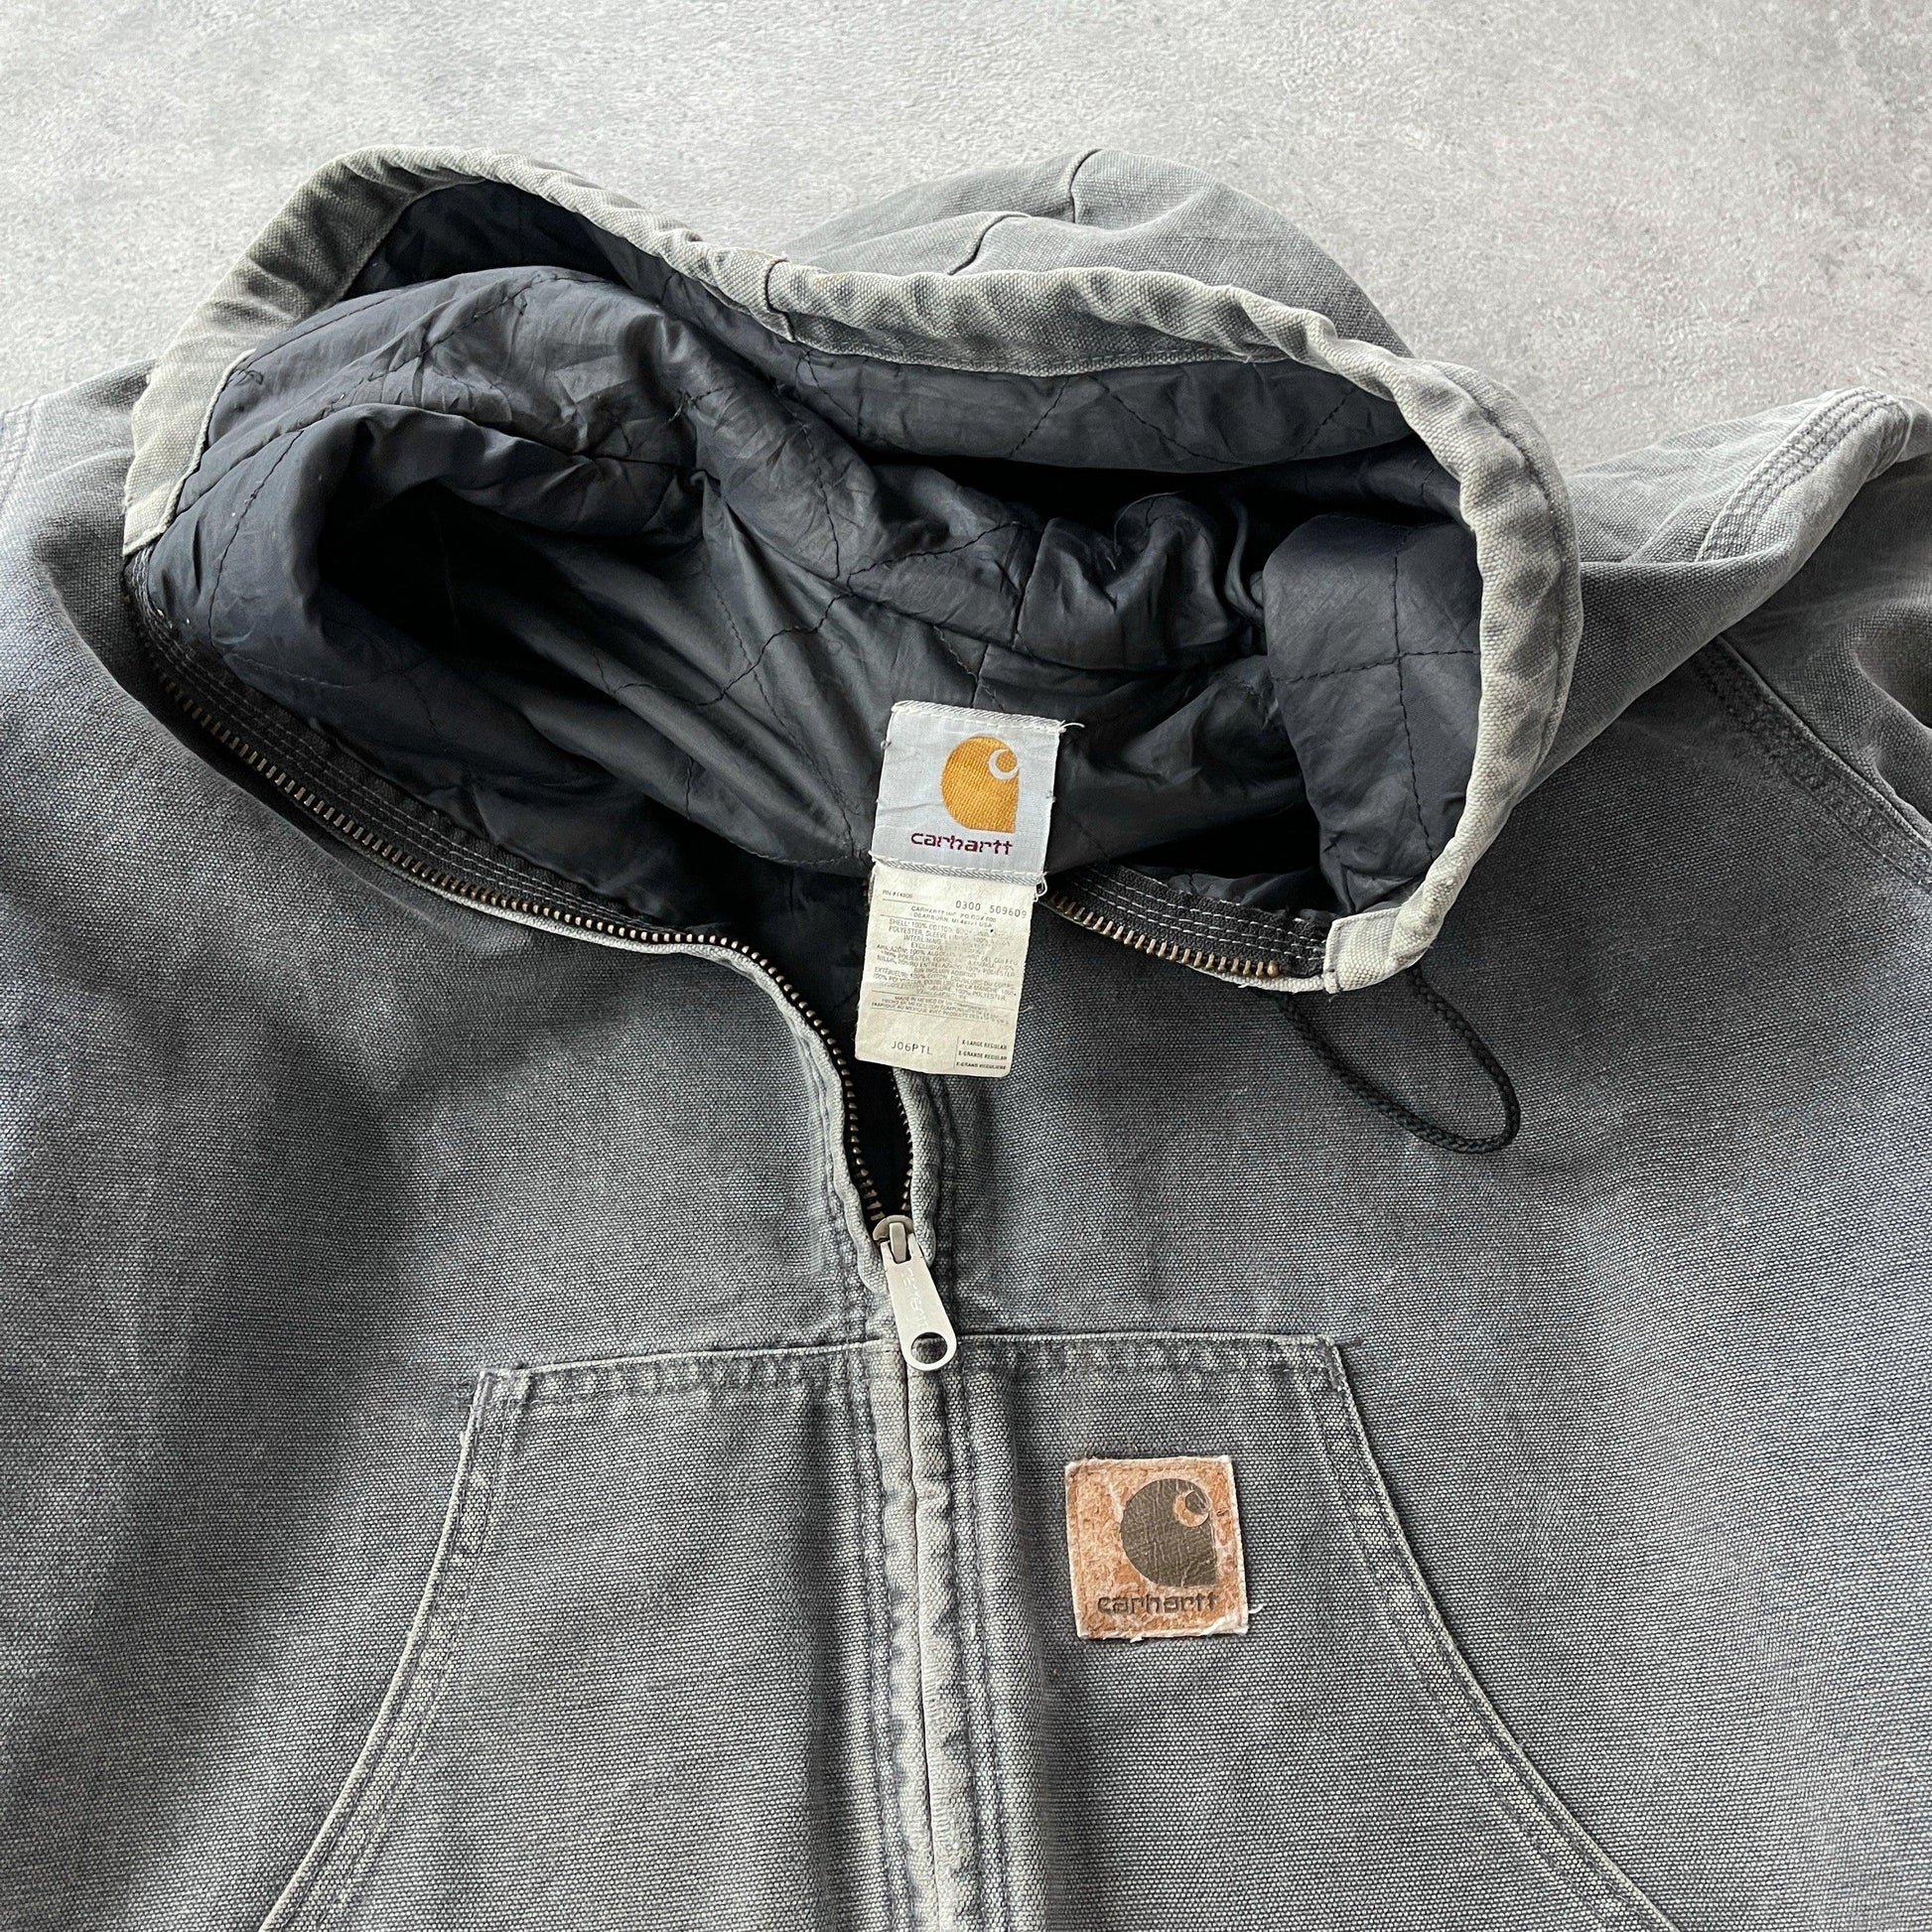 Carhartt 2000 heavyweight active hooded jacket (XL) - Known Source